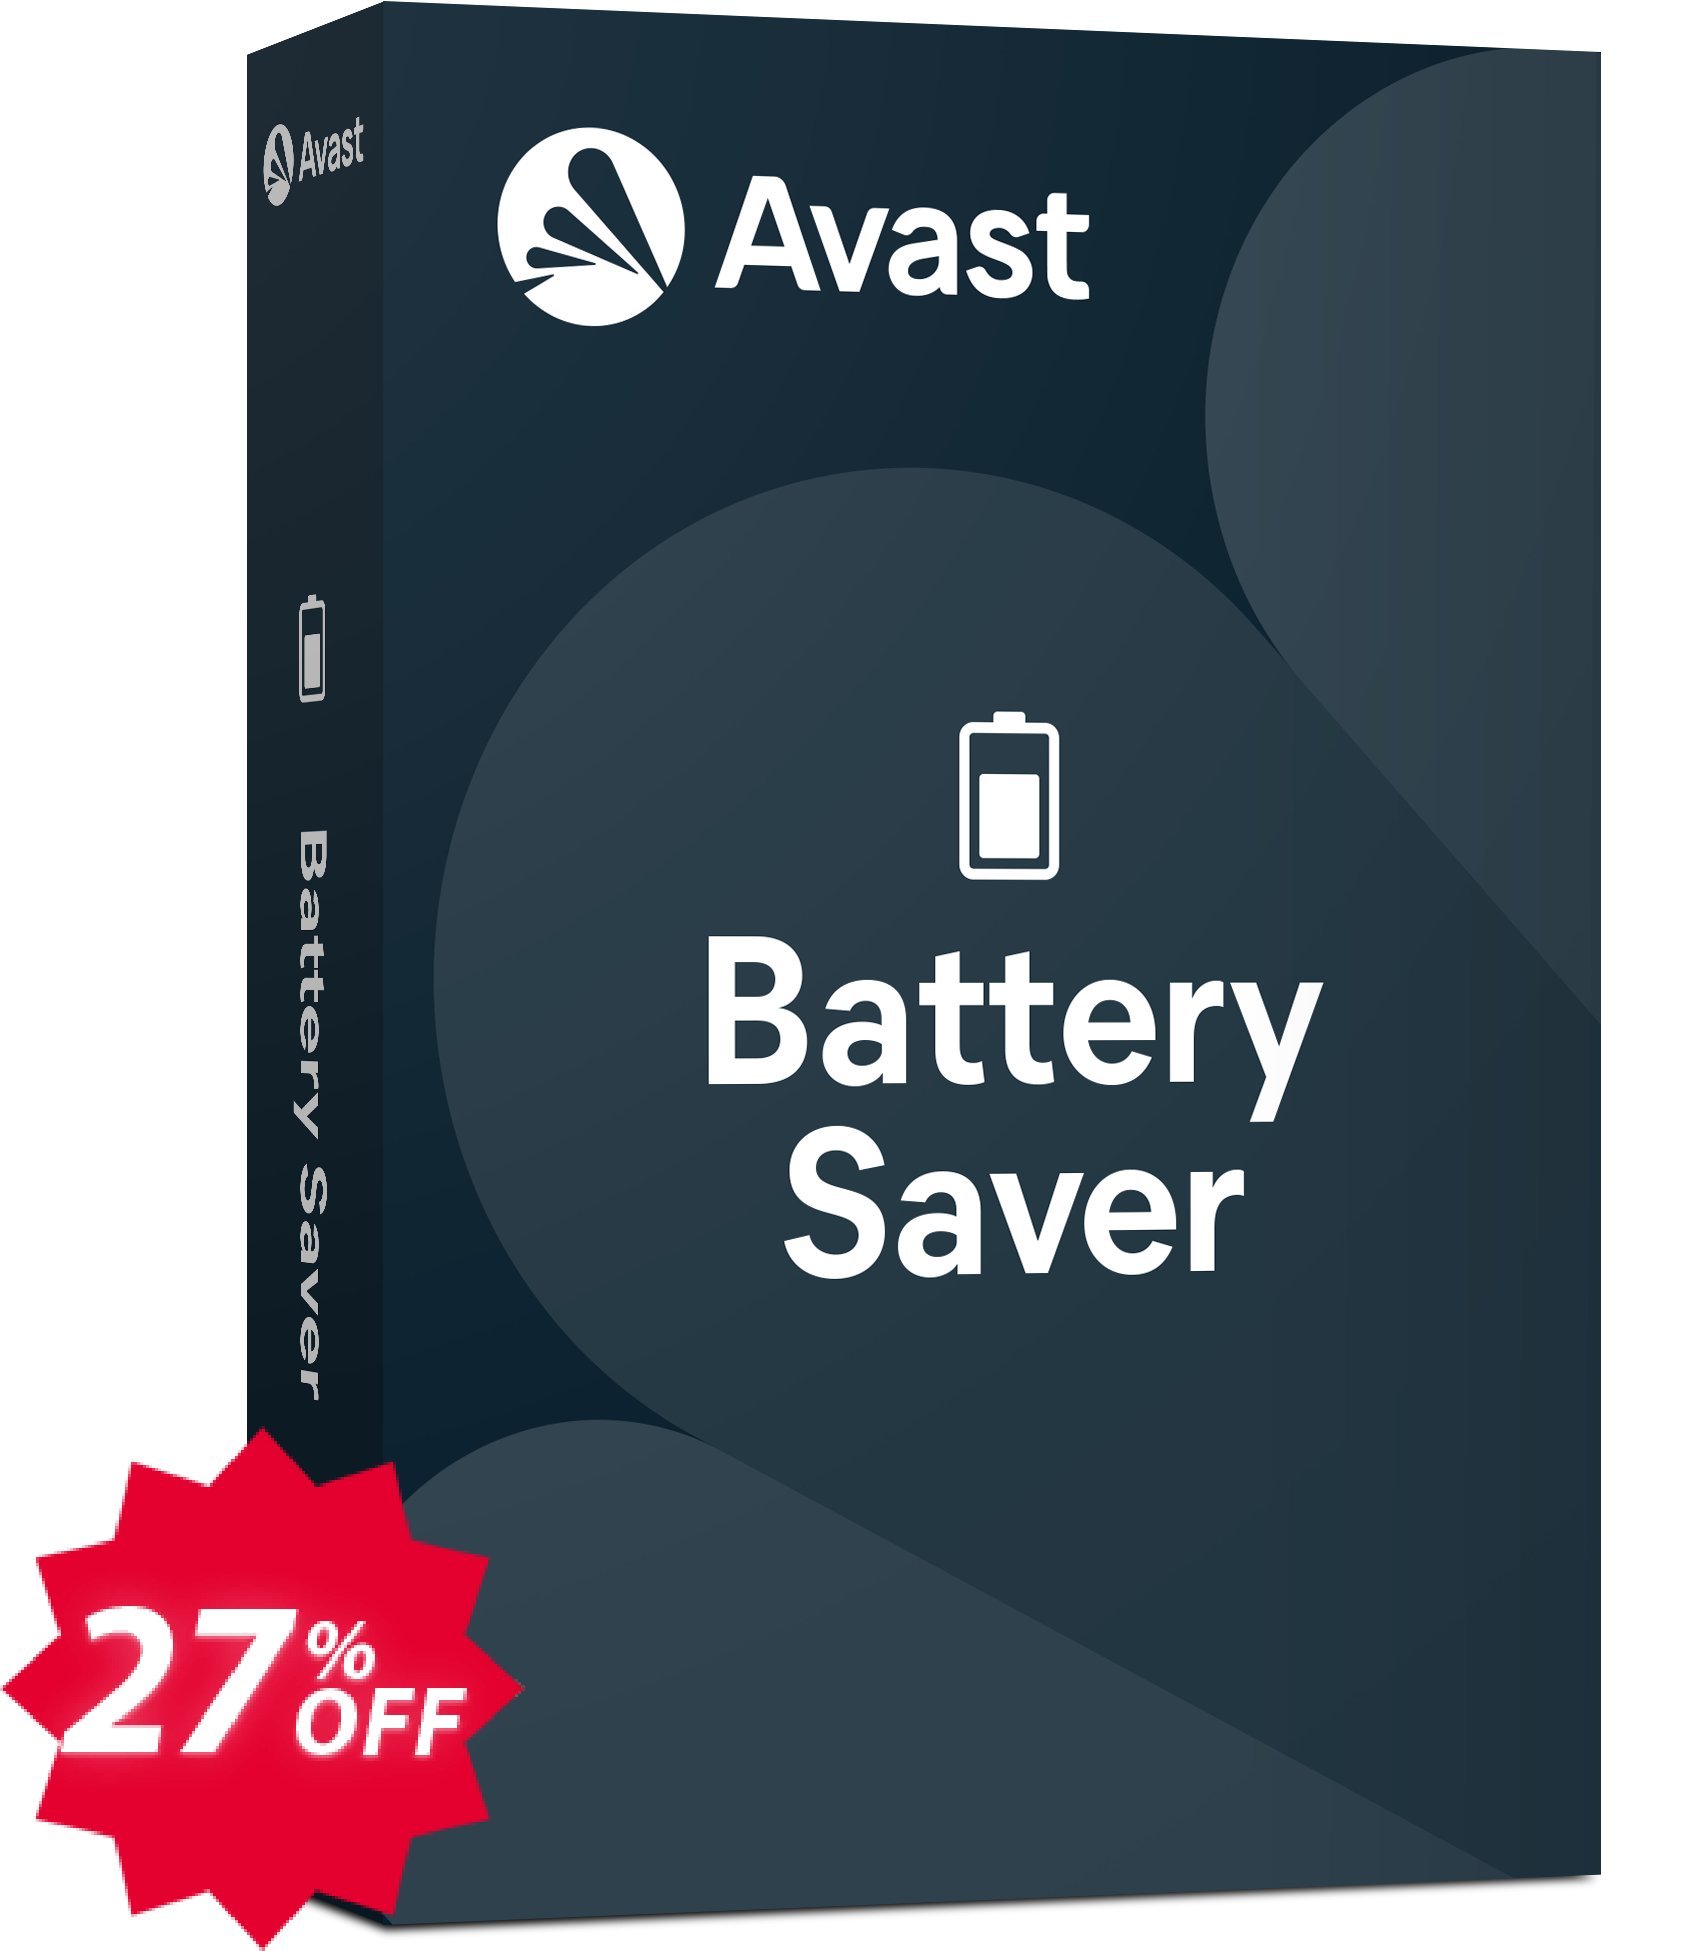 Avast Battery Saver Coupon code 27% discount 